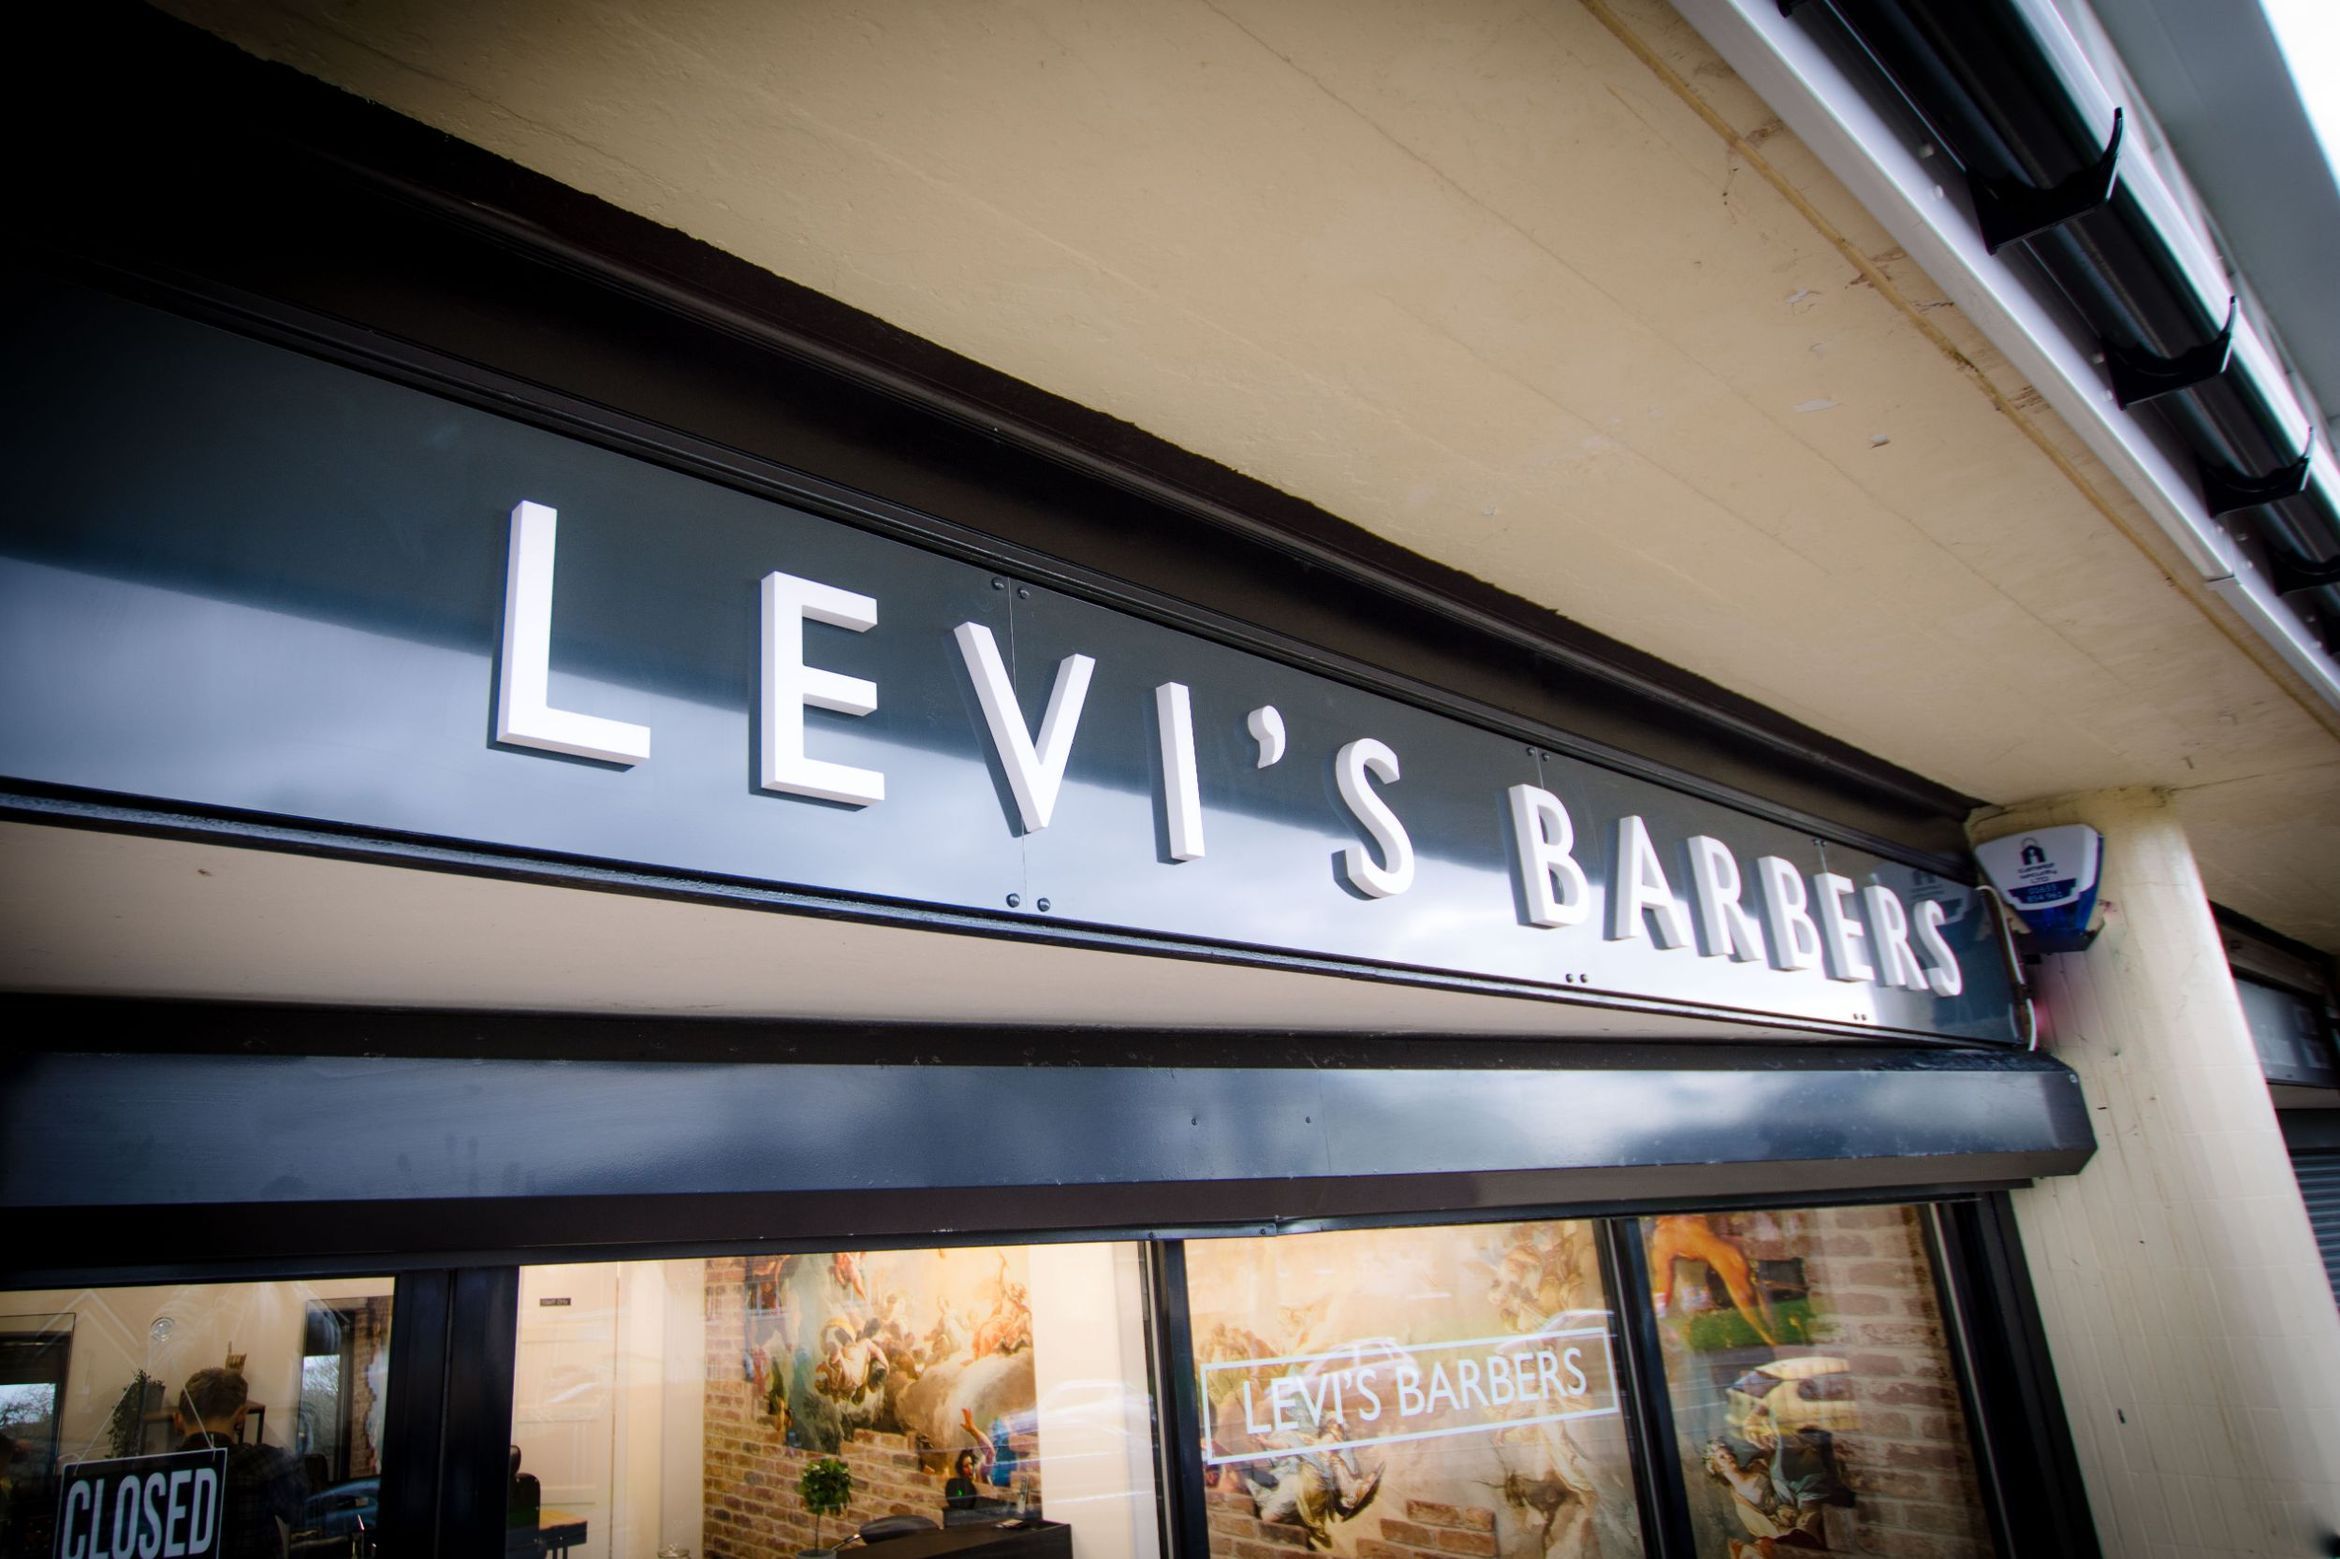 Levi's barbers - Newport - Book Online - Prices, Reviews, Photos